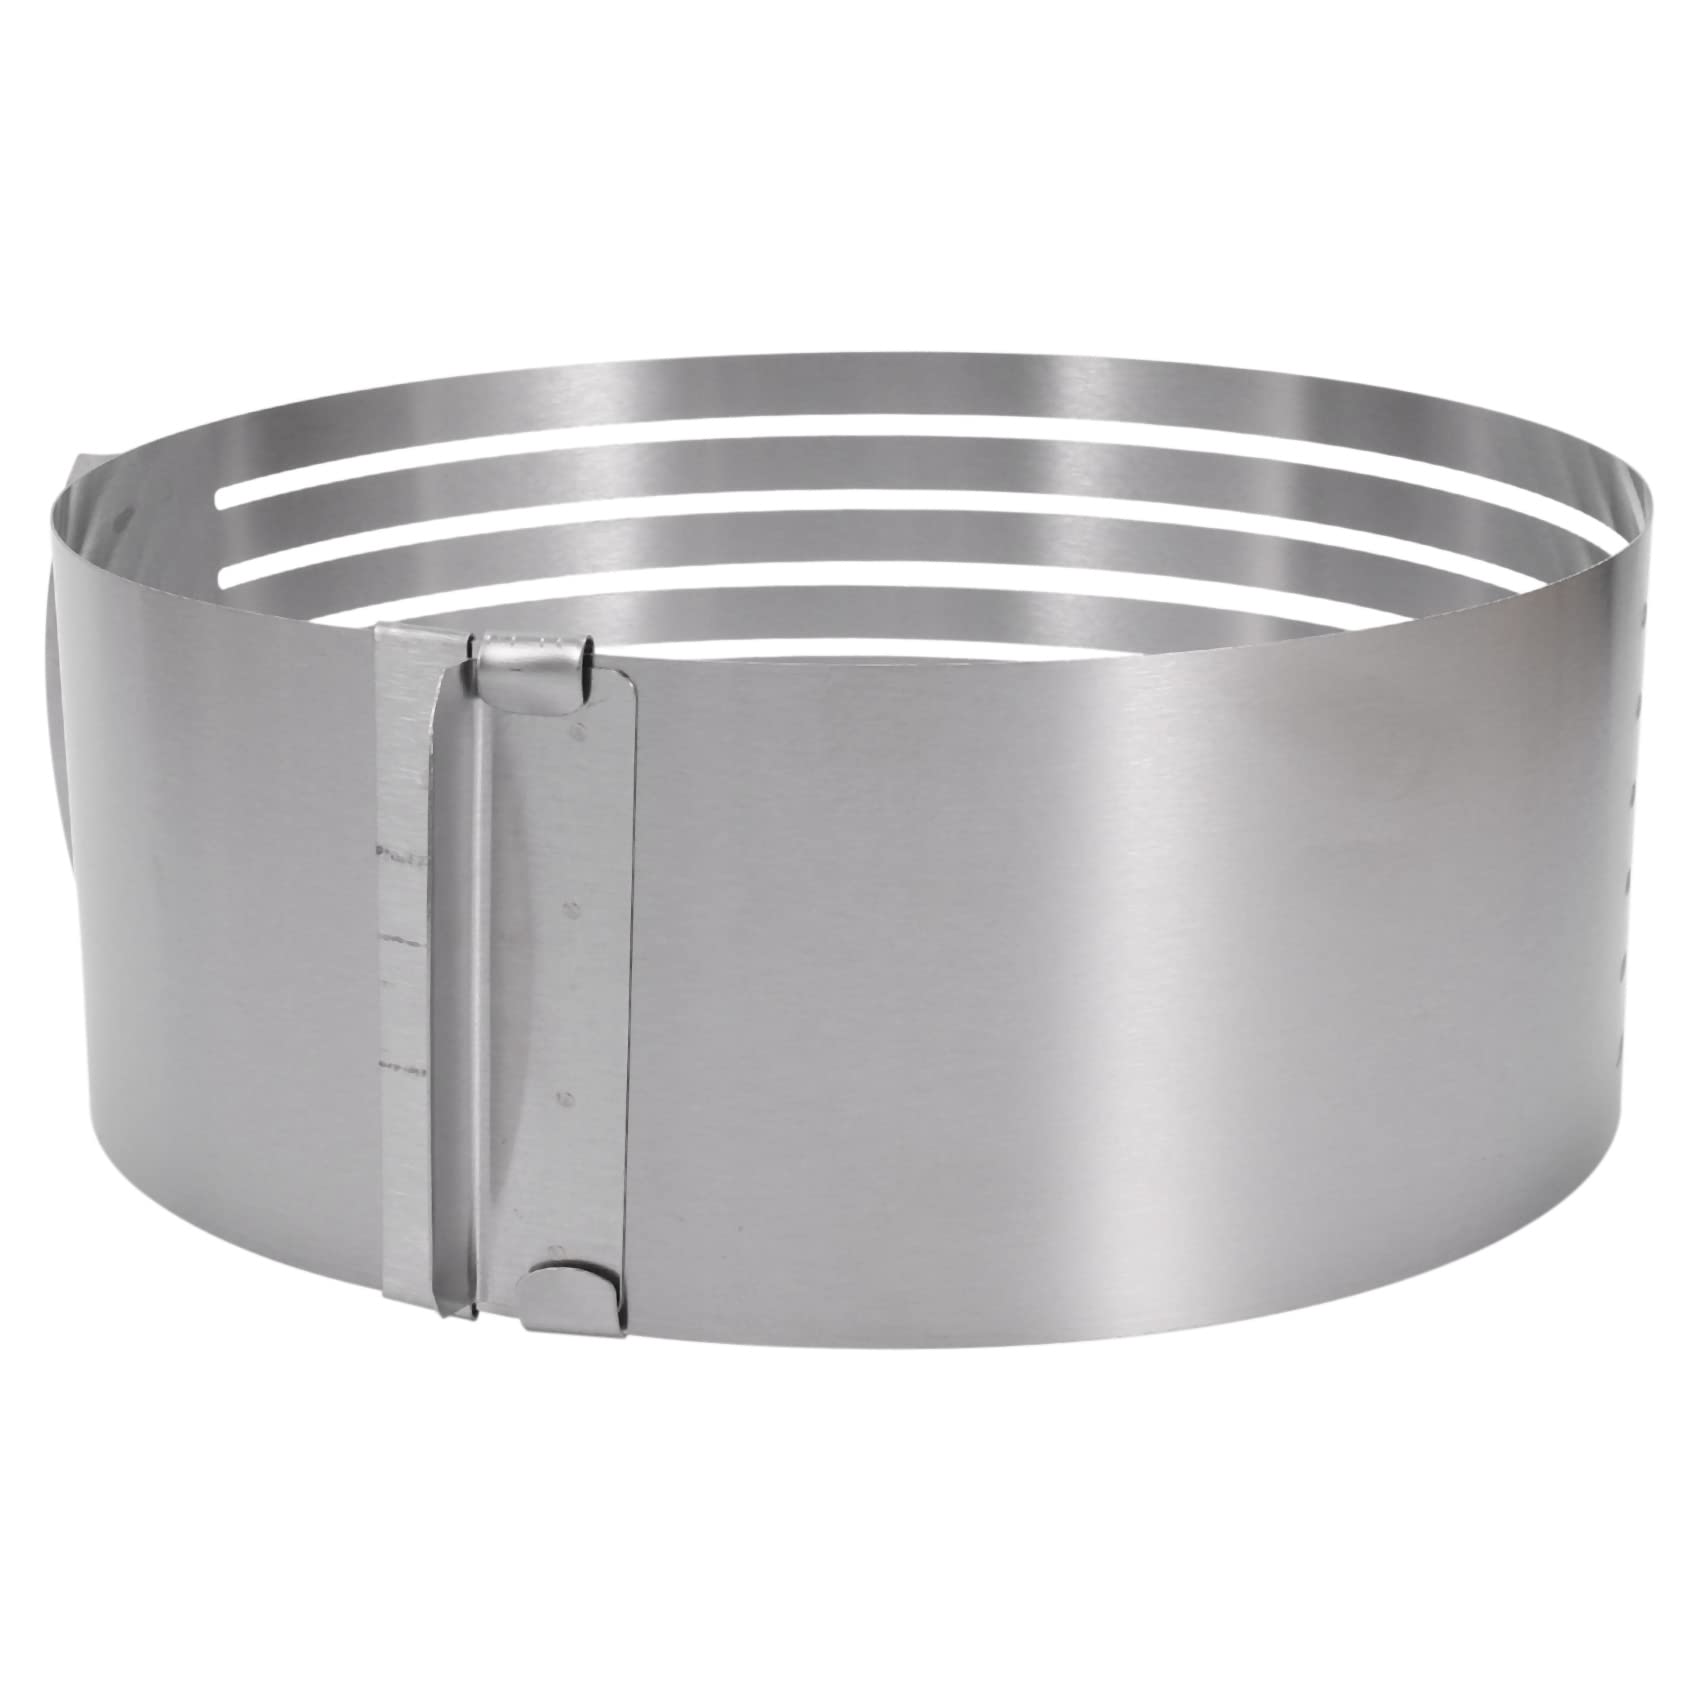 6 to 8 Inch Adjustable Cake Ring for Cutting Layers, Slicing and Leveling Cakes, Stainless Steel 7-Layer Cake Toast Slicer Leveler